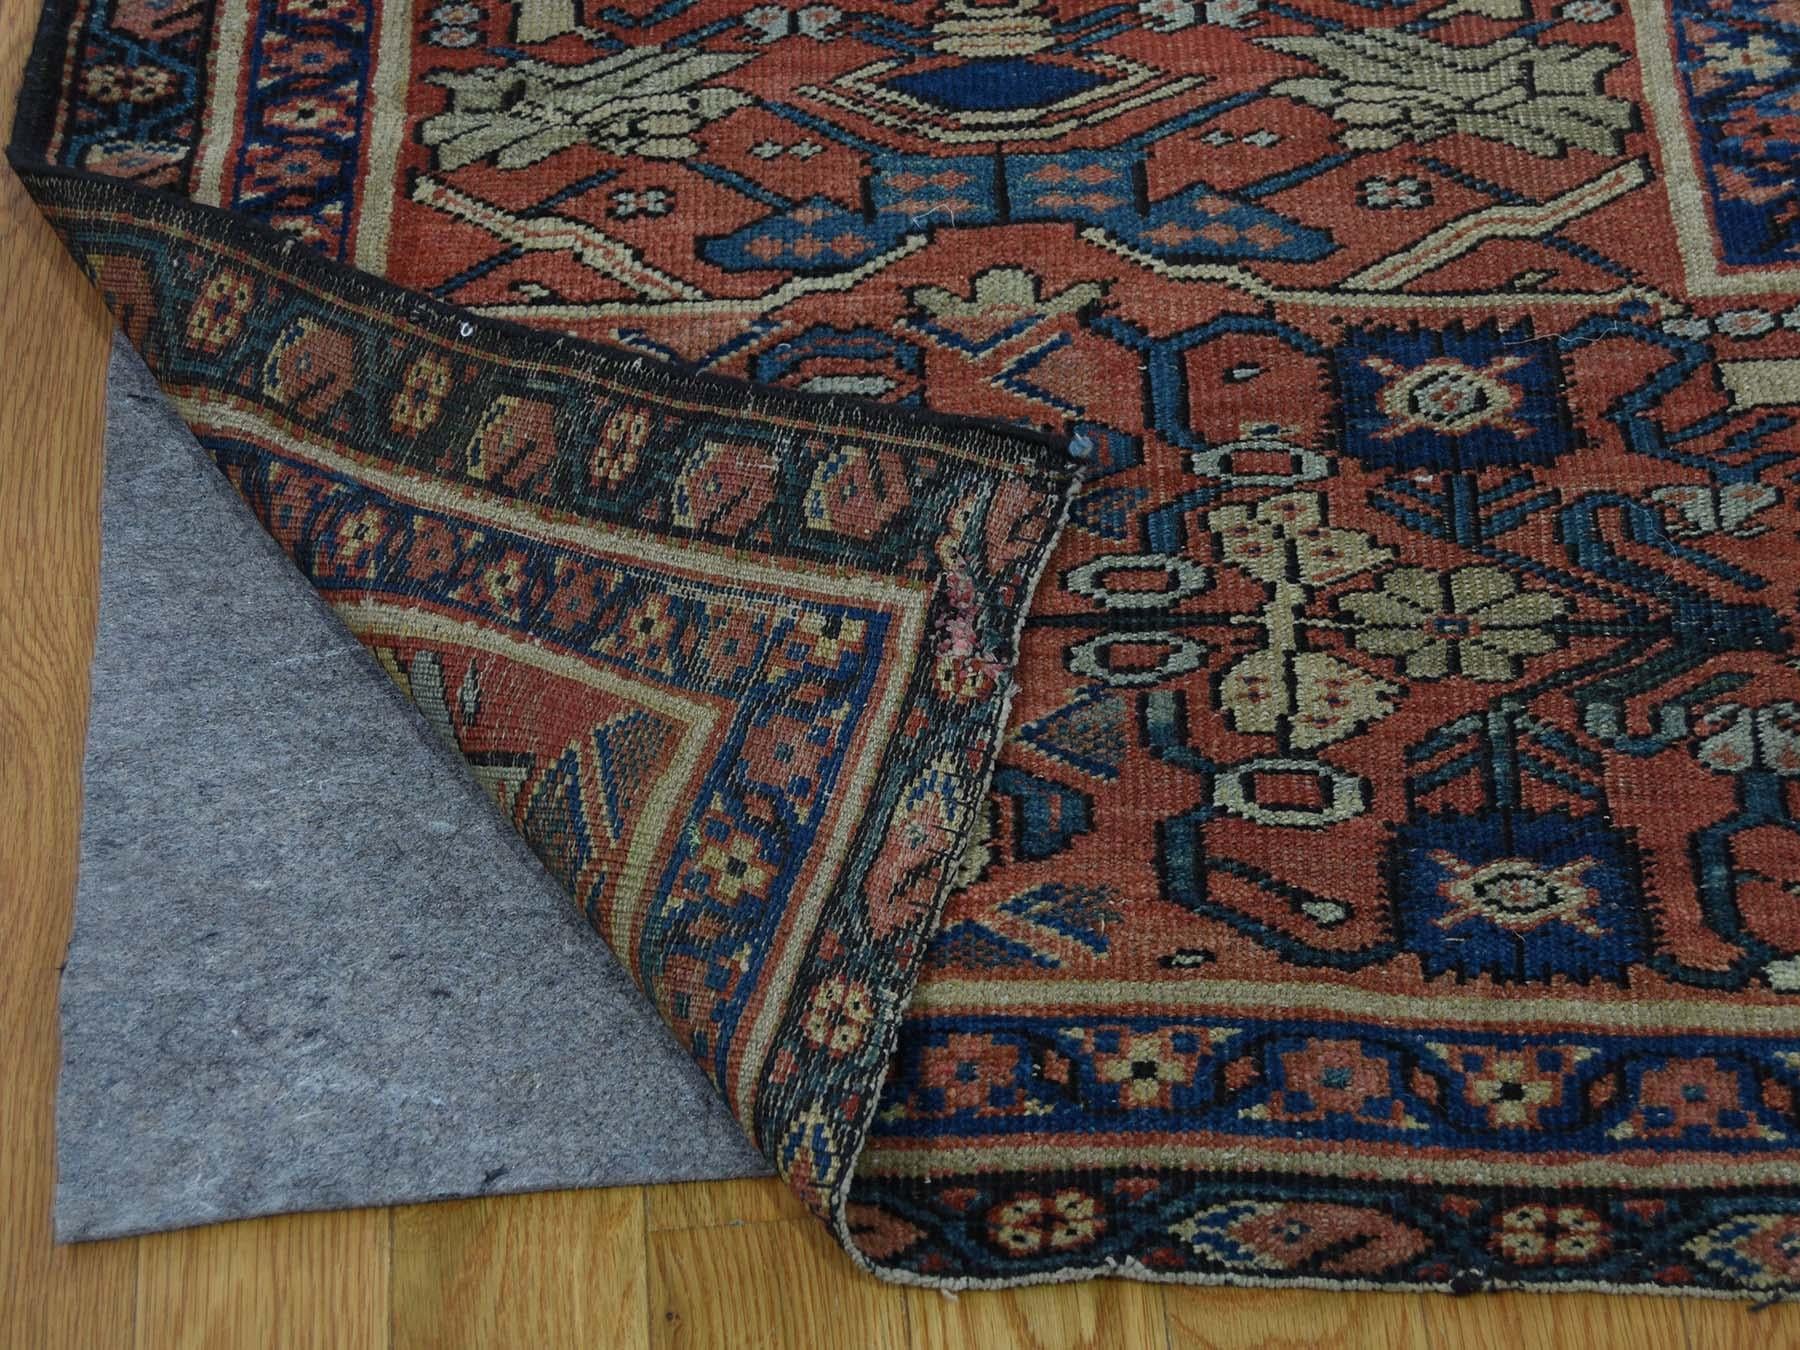 Late 19th Century 1890 Antique Persian Mahal Rug Fish Design, Camel Field, Wide Border For Sale